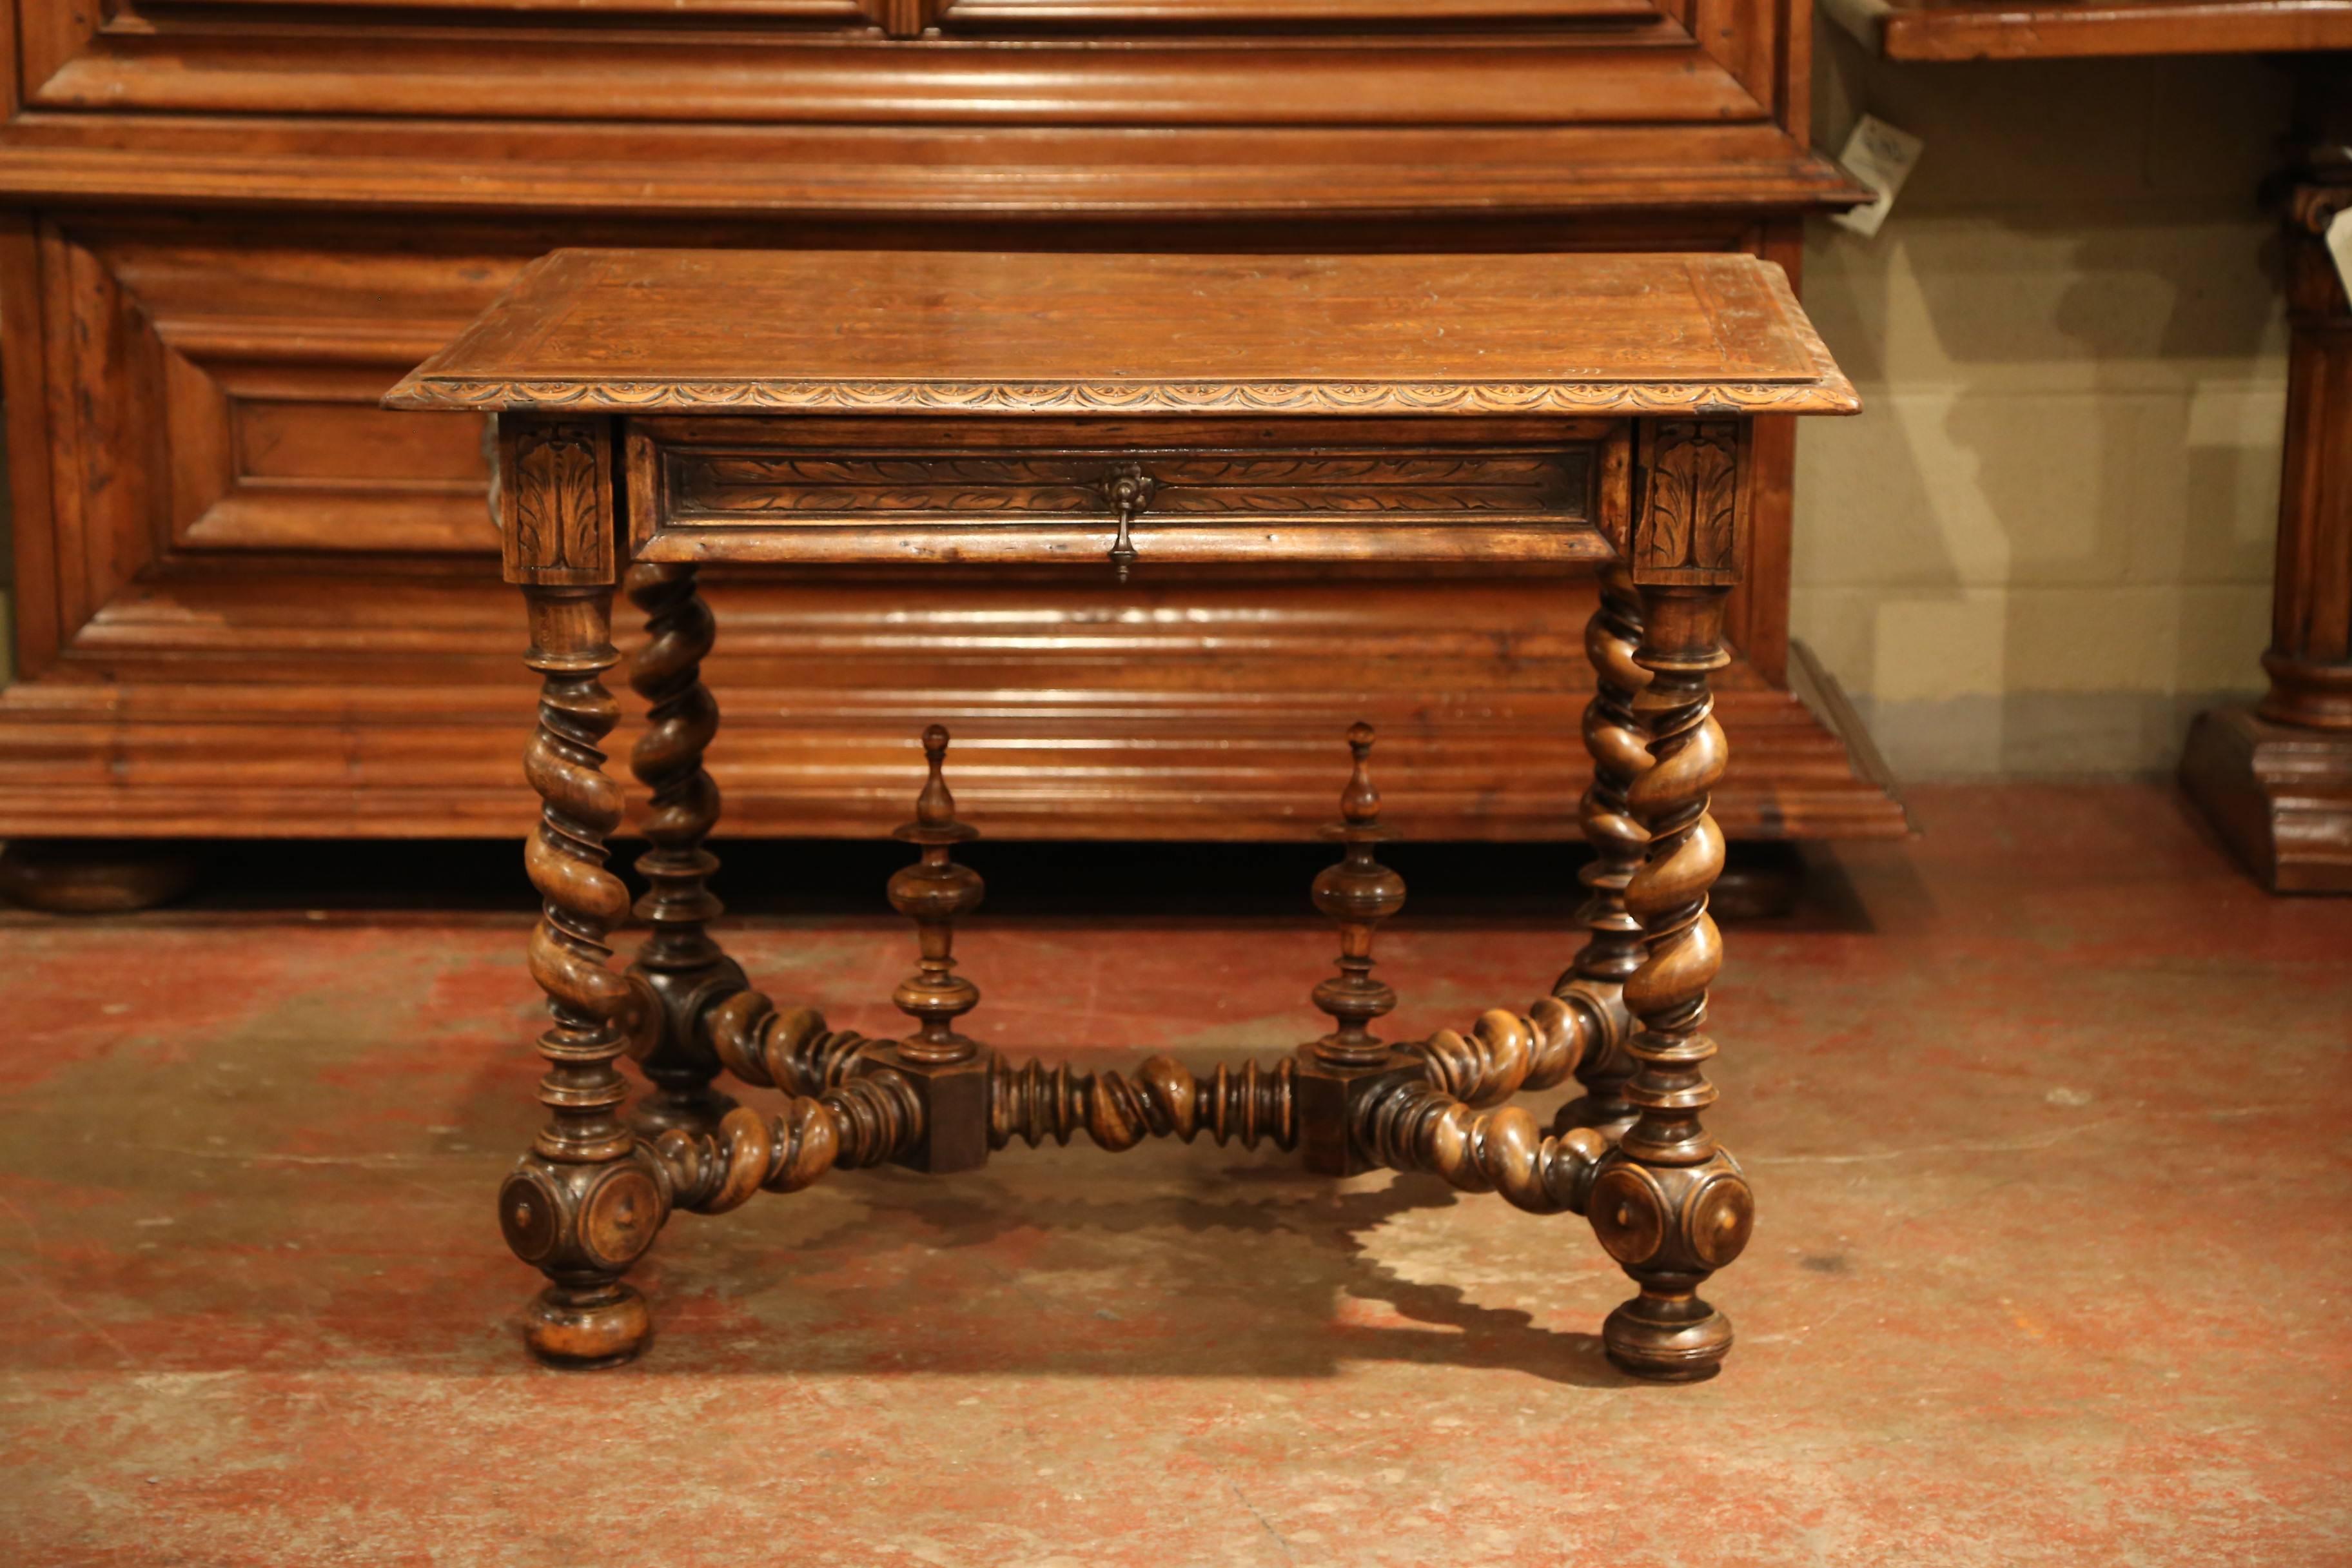 Incorporate extra, functional surface space into your living room with this elegant fruitwood end table. Crafted in the Perigord region of France circa 1860, this small desk features an unusual engraved surface top with decorations including